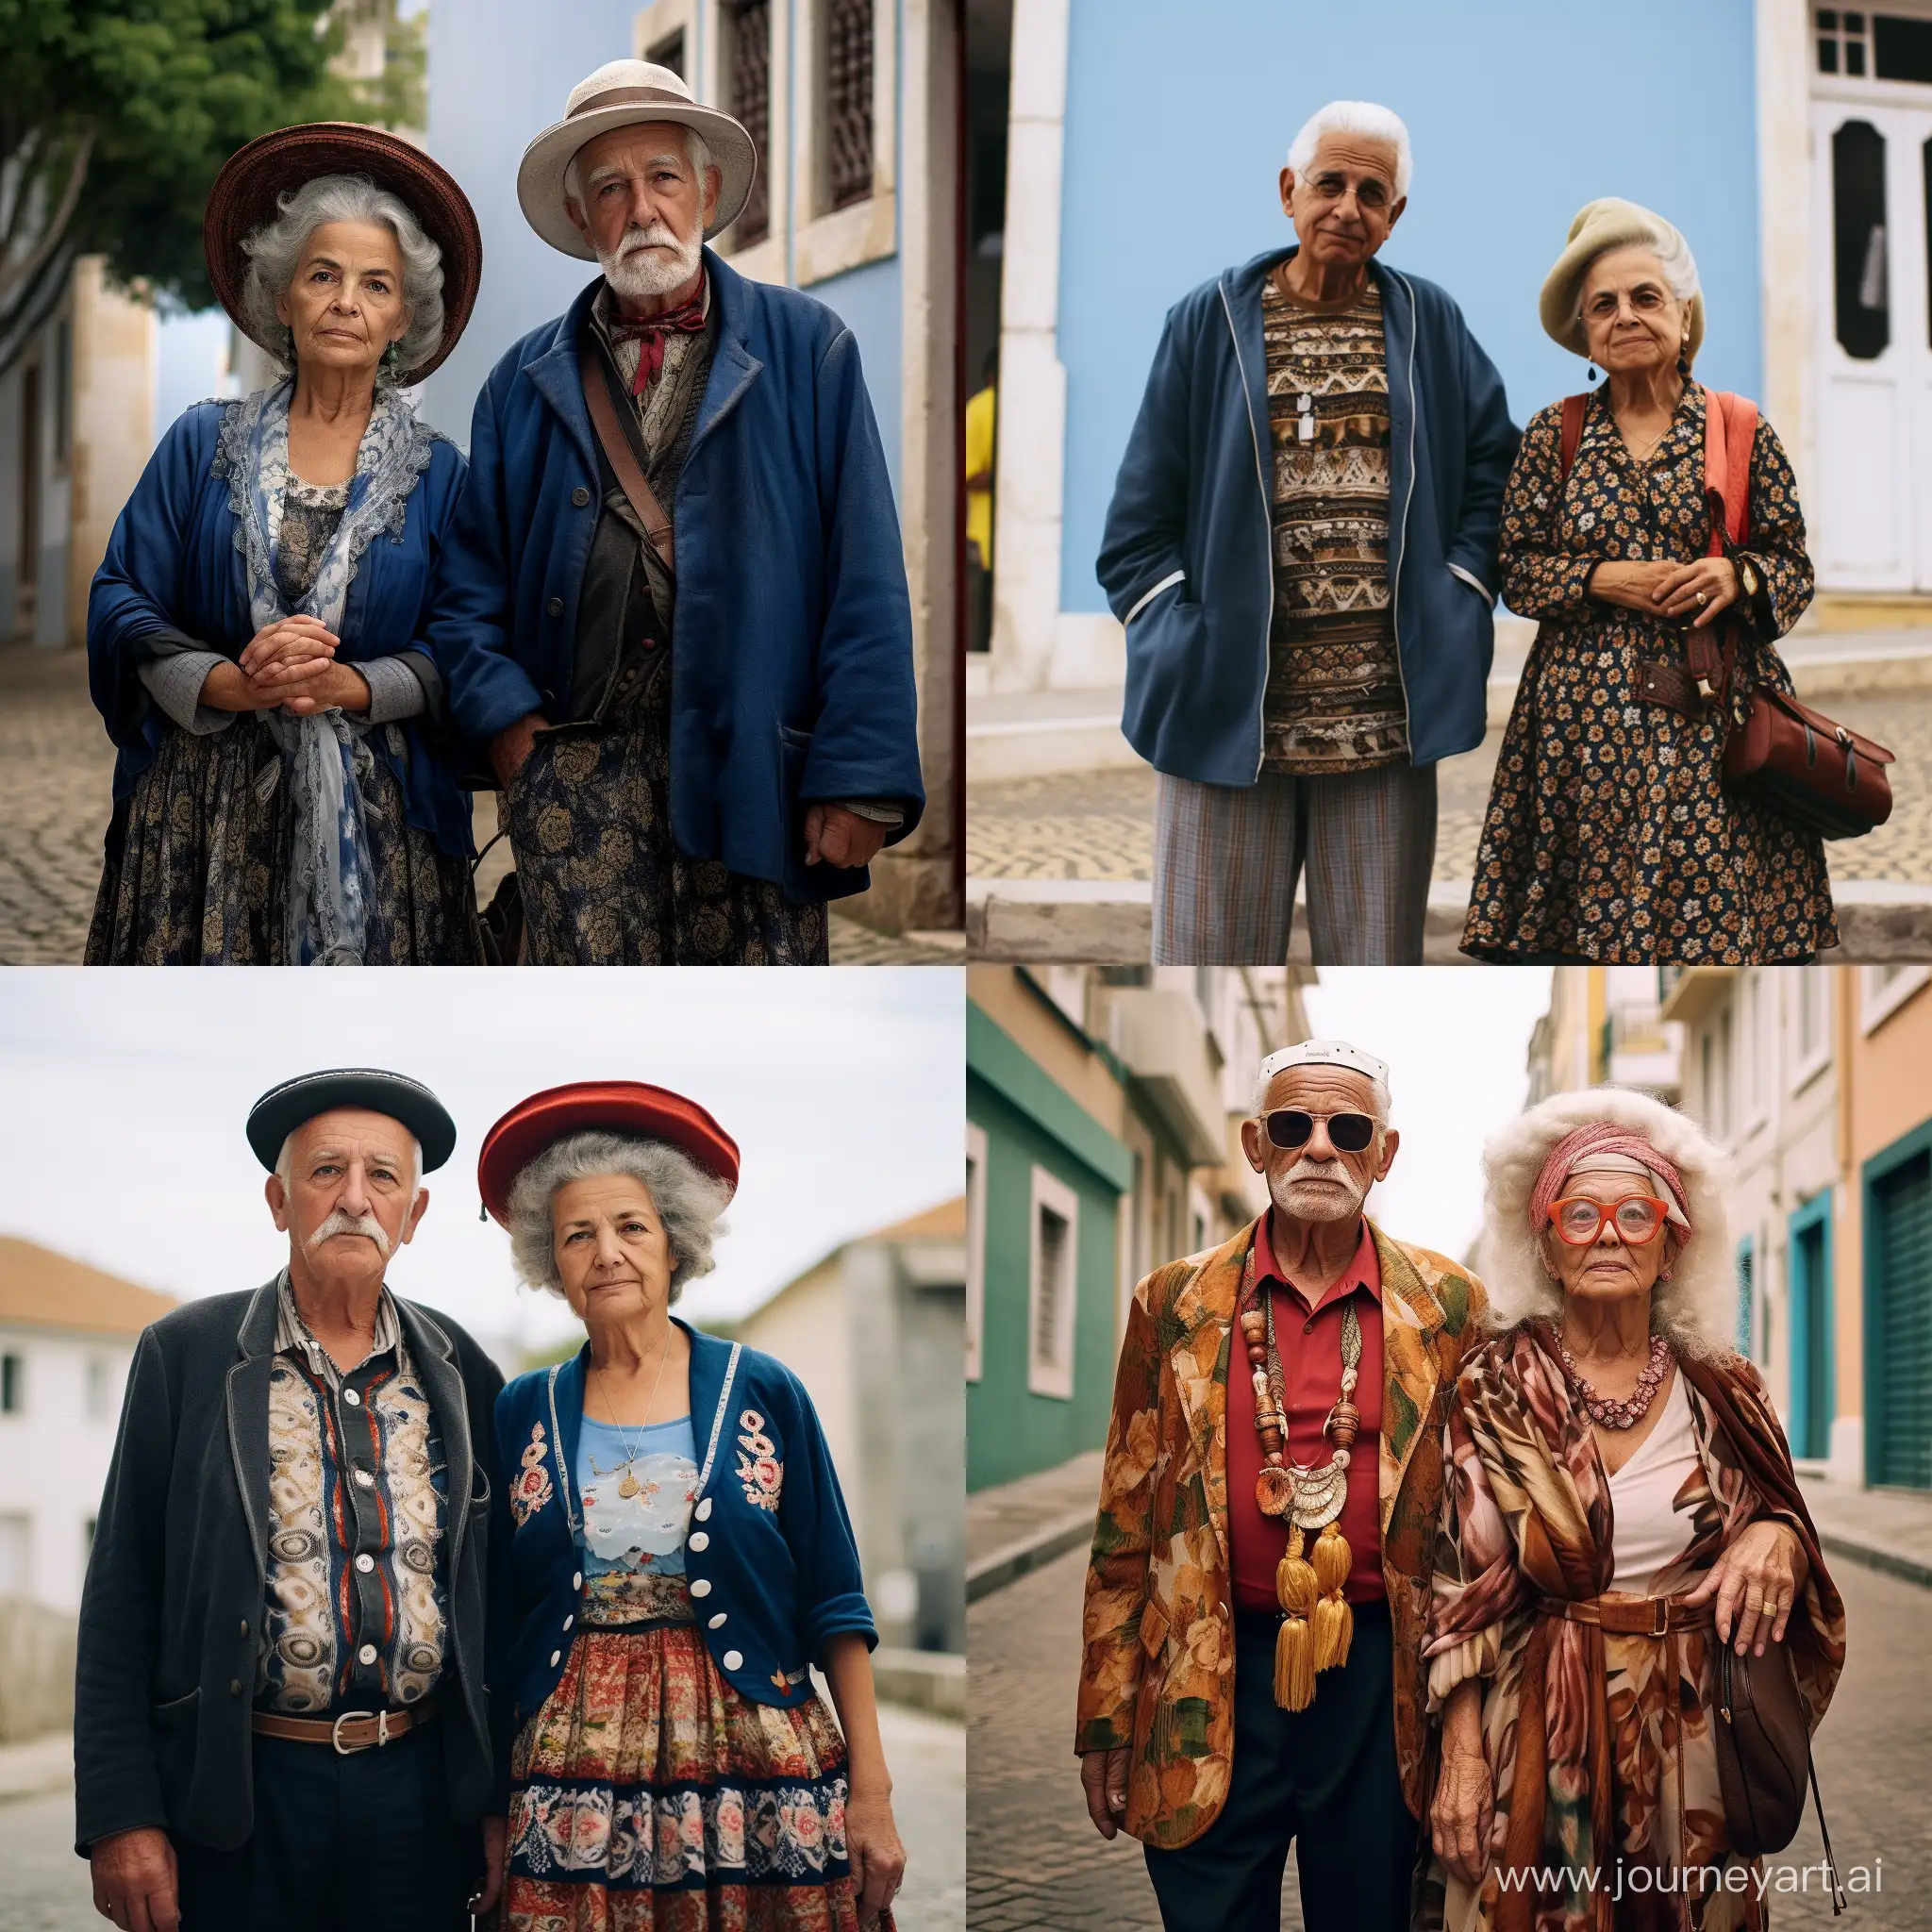 Portuguese-Couple-in-Traditional-Clothing-60YearOld-Man-and-Woman